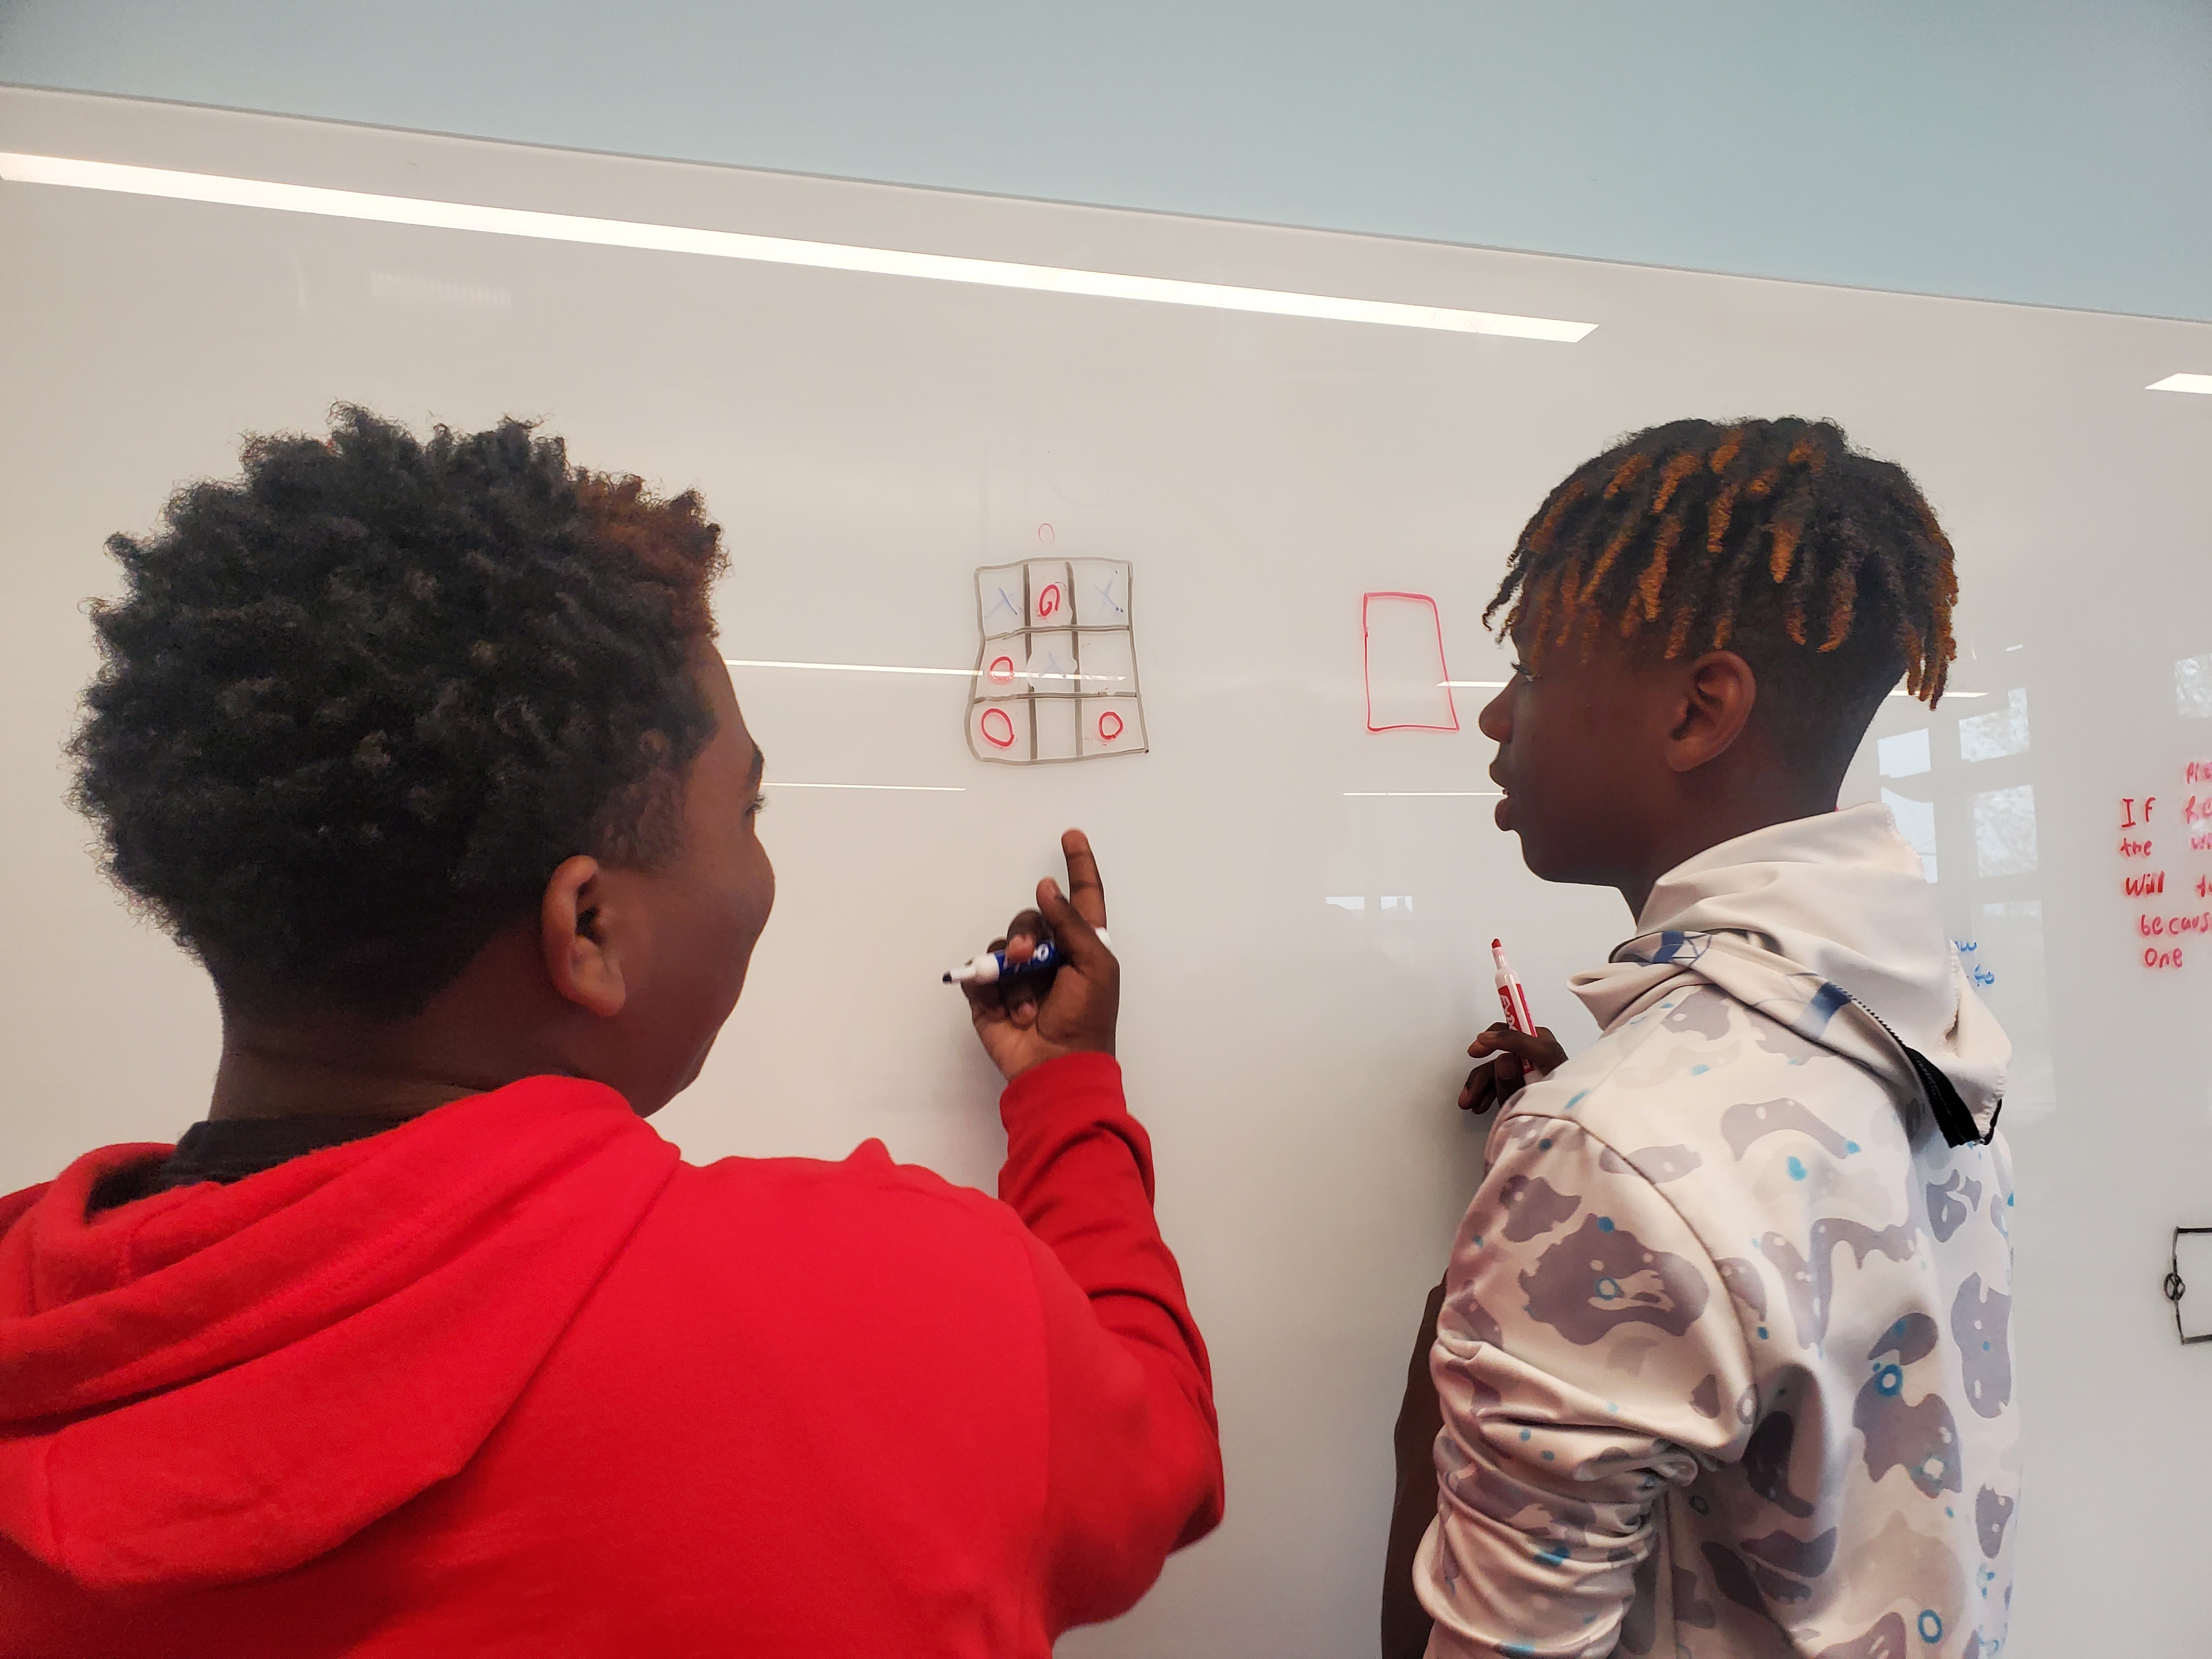 Students using the board.